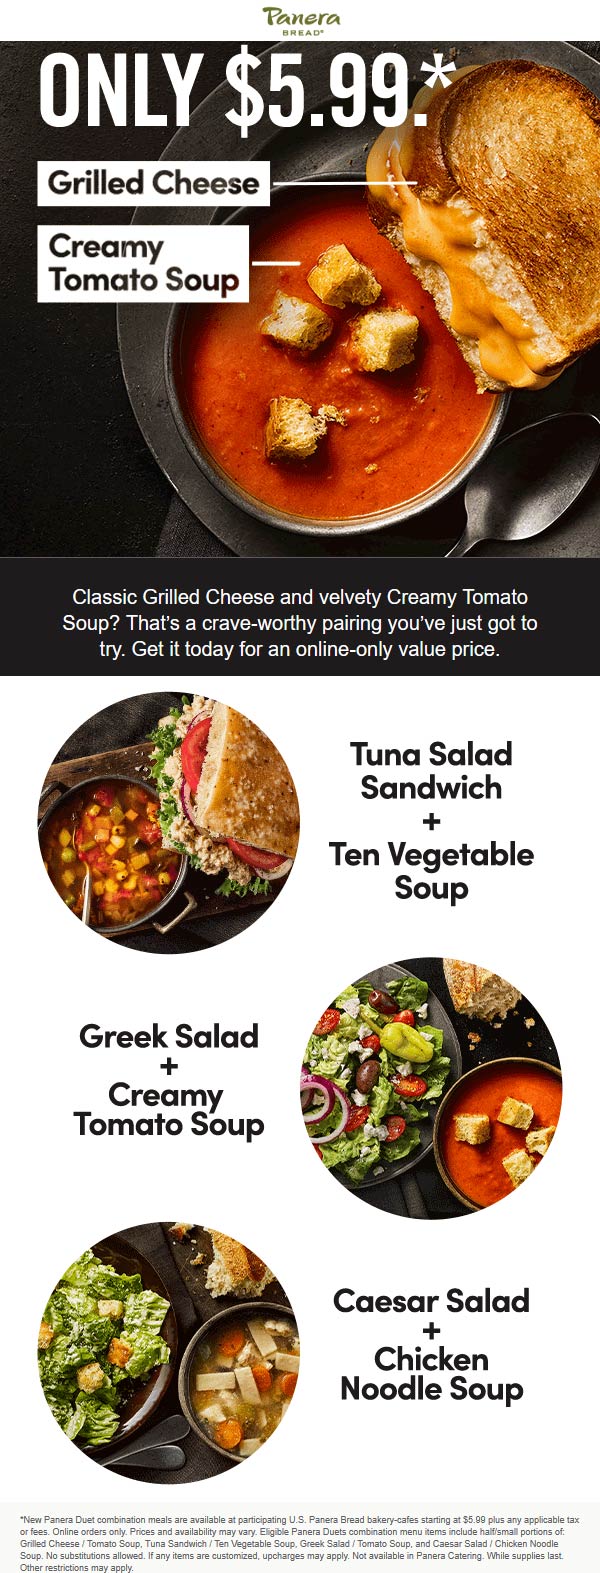 Grilled cheese + tomato soup = 6 at Panera Bread, other duets also